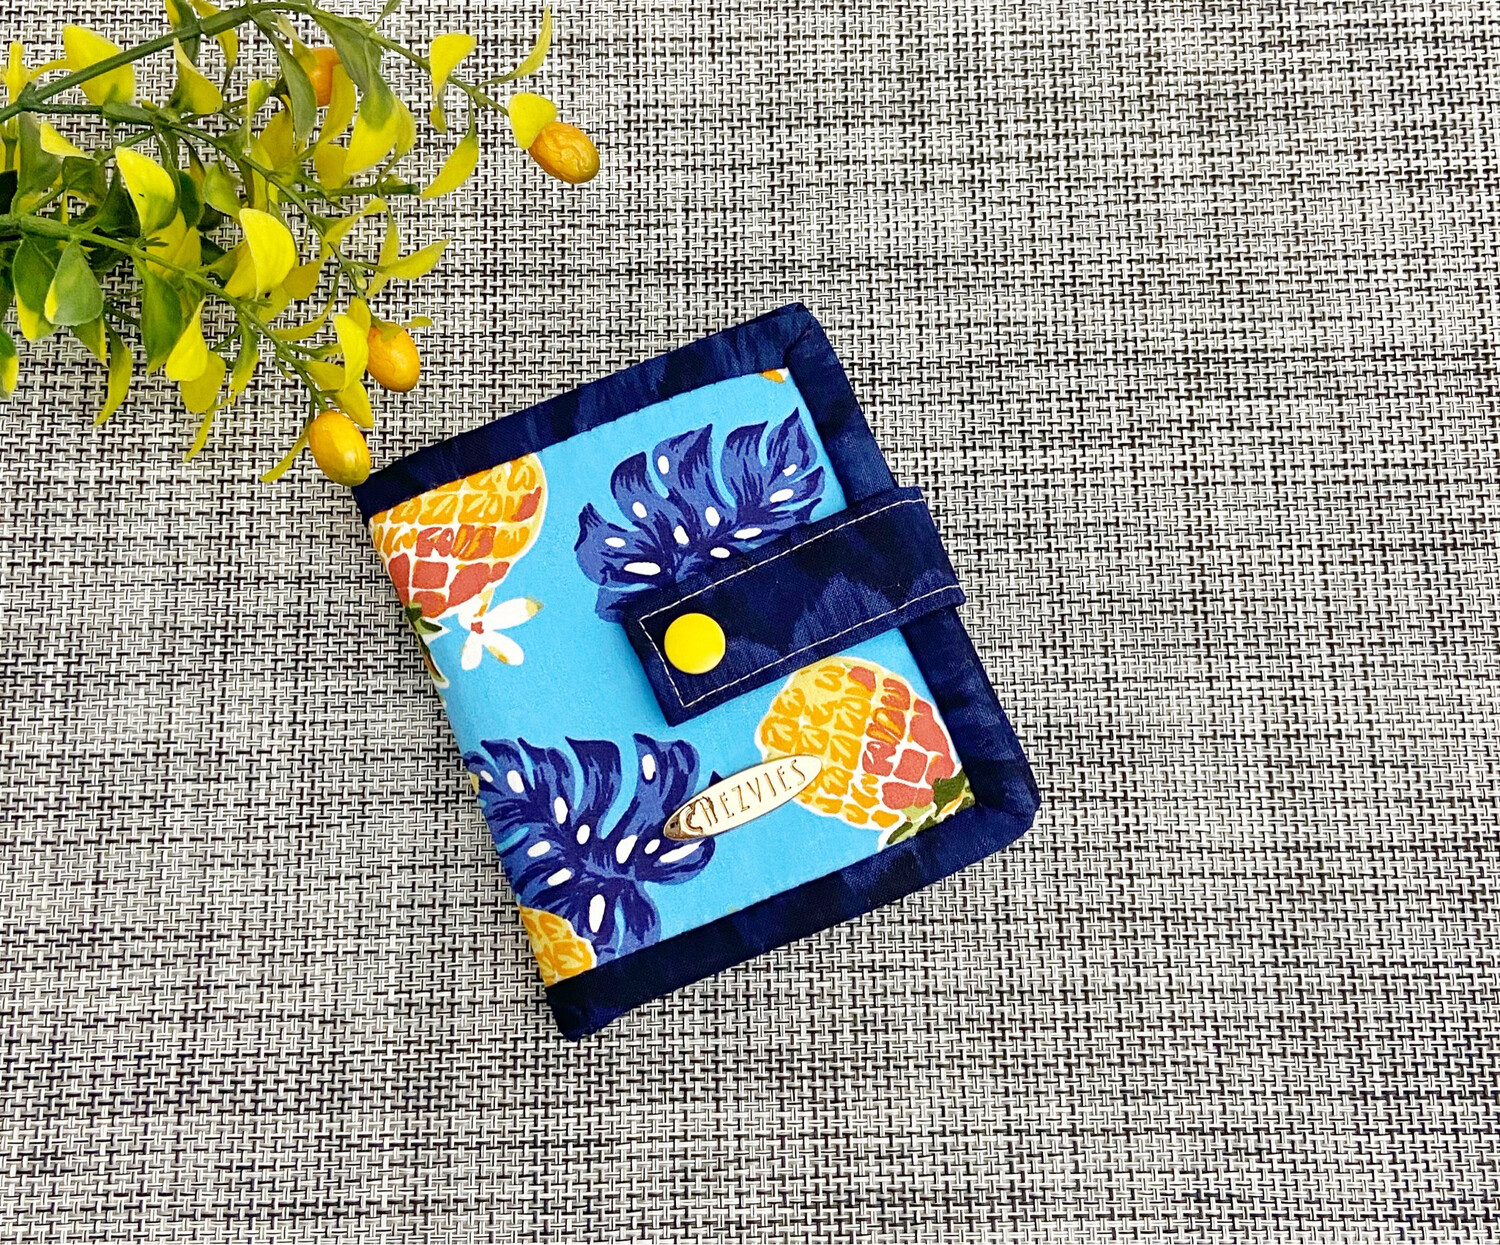 Blue Small Fabric Wallet for Women in Monstera Design